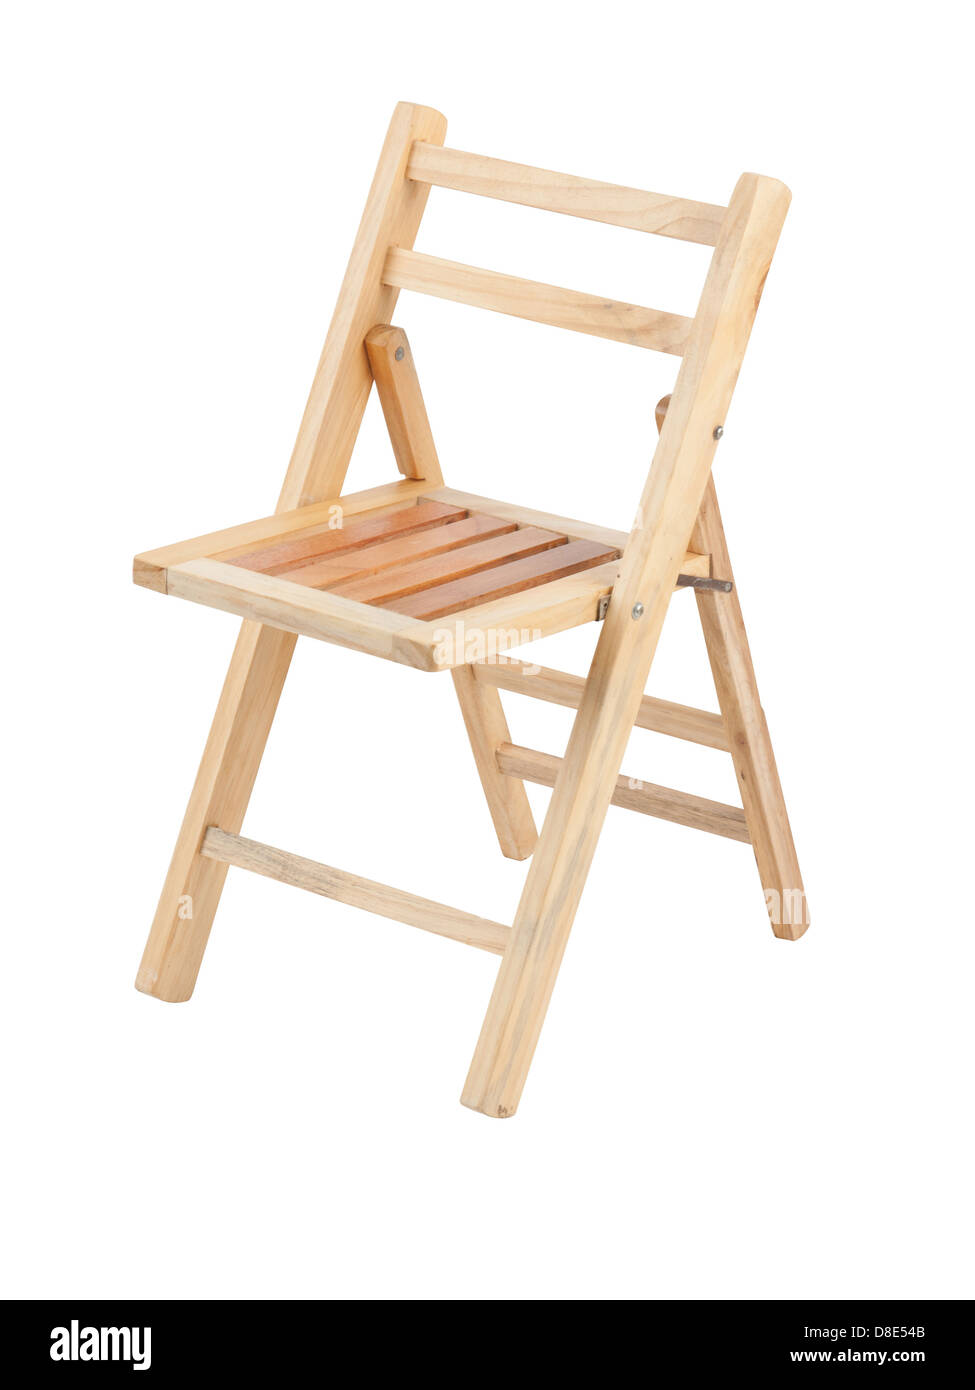 Small folding wooden chair on white background Stock Photo